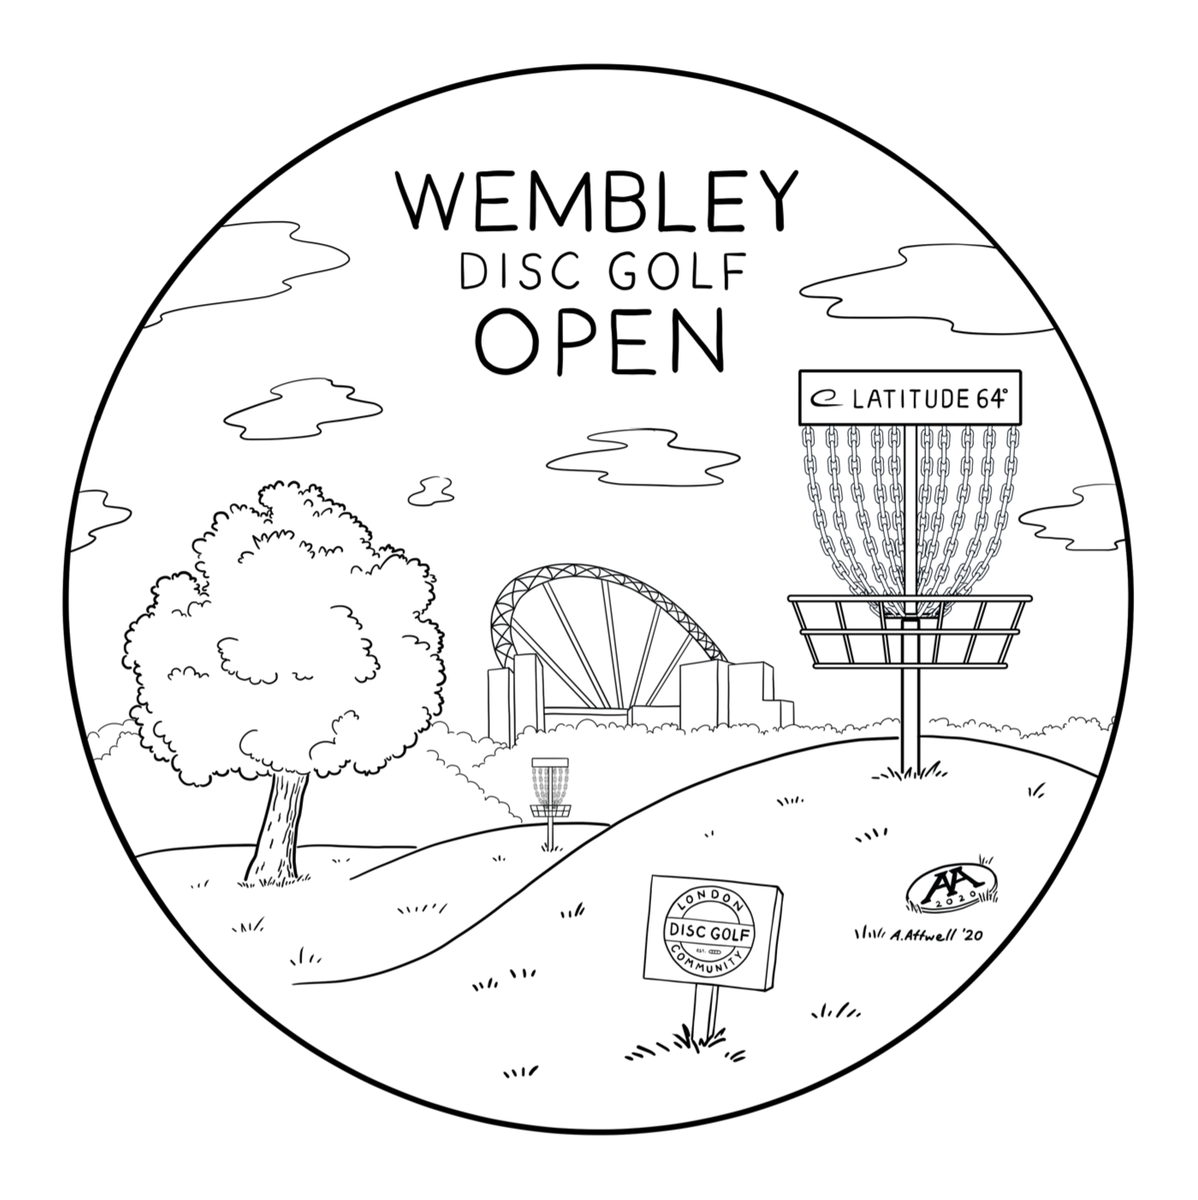 Weight: 175g to 179g – London Disc Golf Community